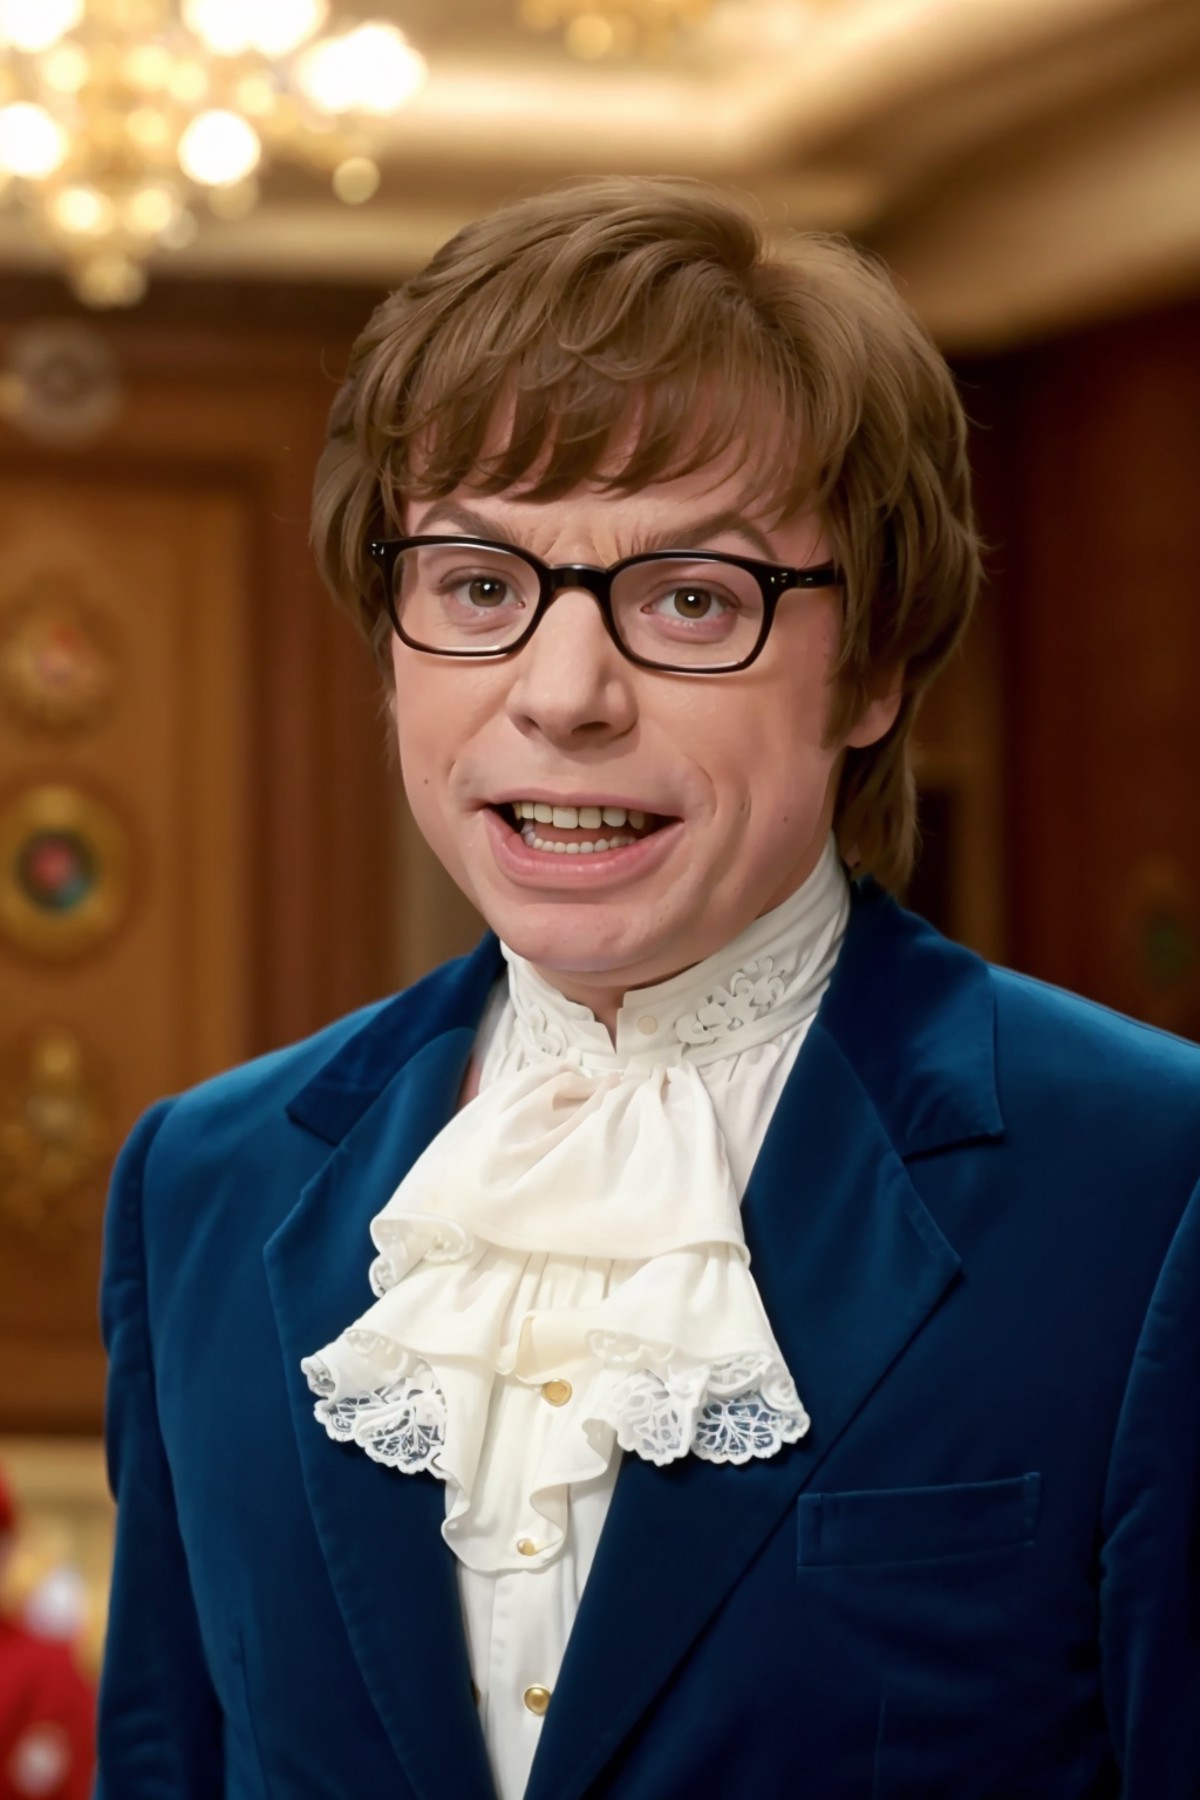 <lora:Austin Powers:0.6> Austin Powers, standing in a luxury mansion hall
(masterpiece:1.2) (photorealistic:1.2) (bokeh) (...